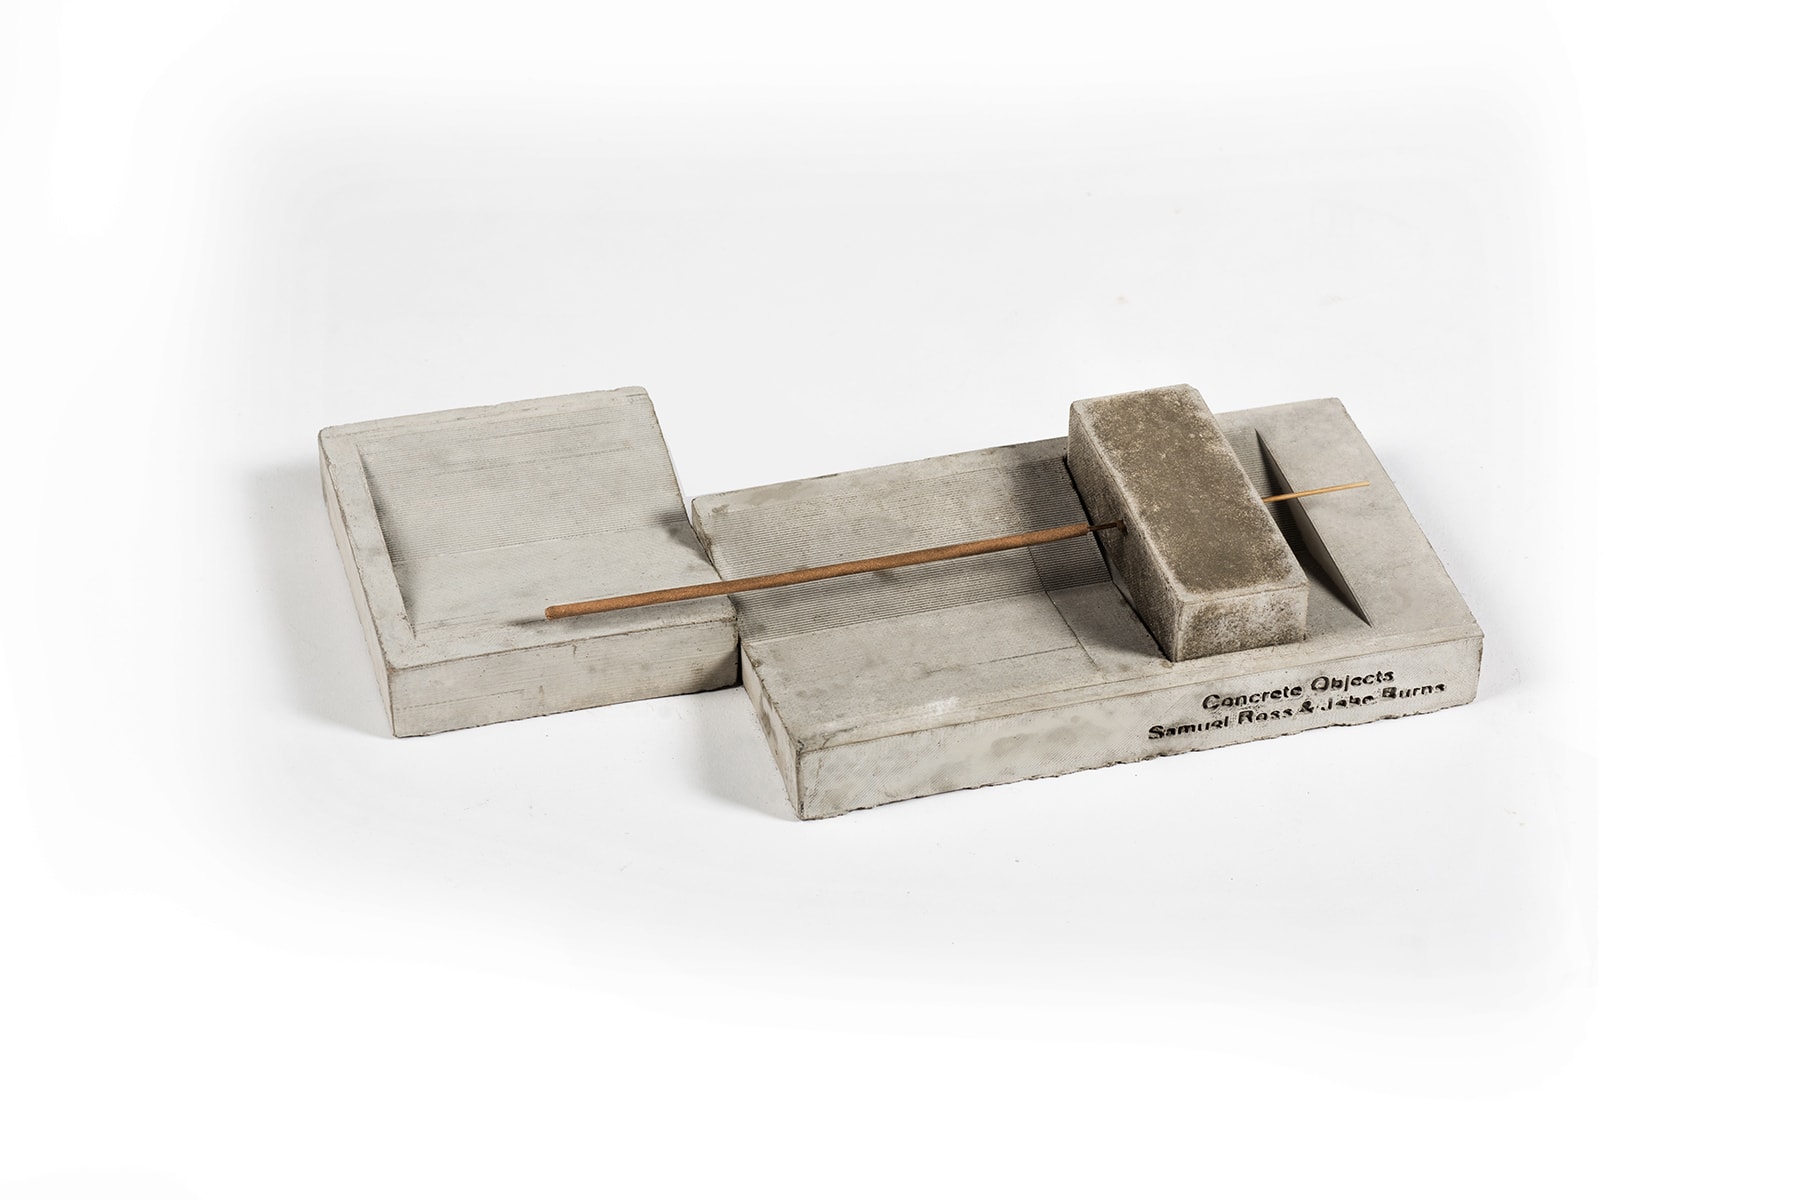 A-COLD-WALL* Samuel Ross Jobe Burns Concrete Objects Incense Cement Cup Holder